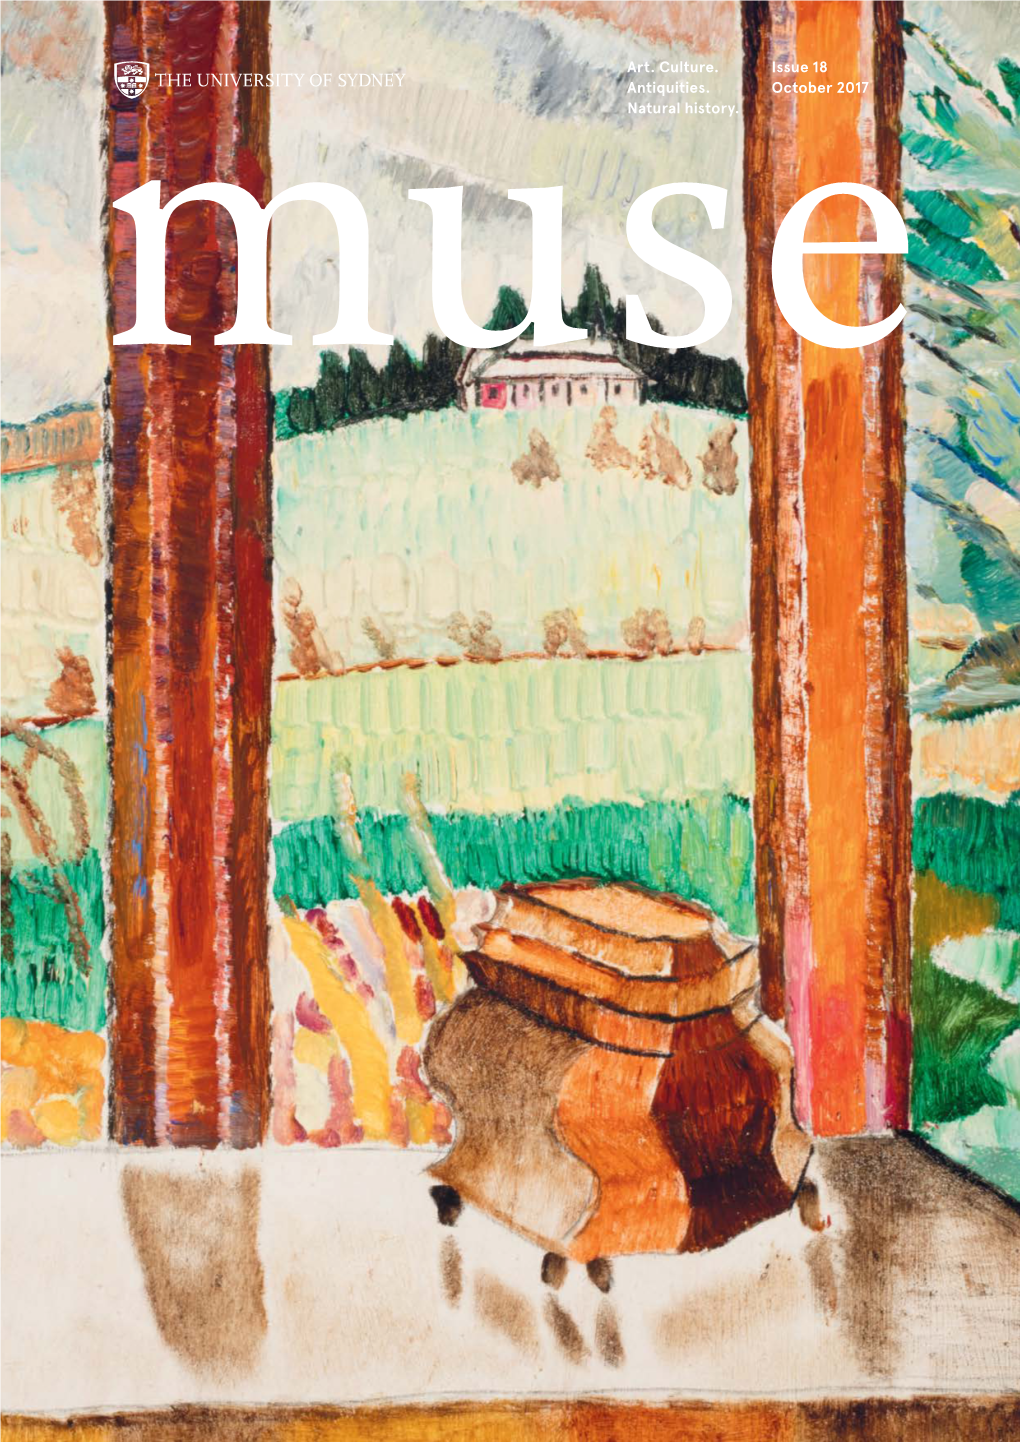 MUSE Issue 18, October 2017